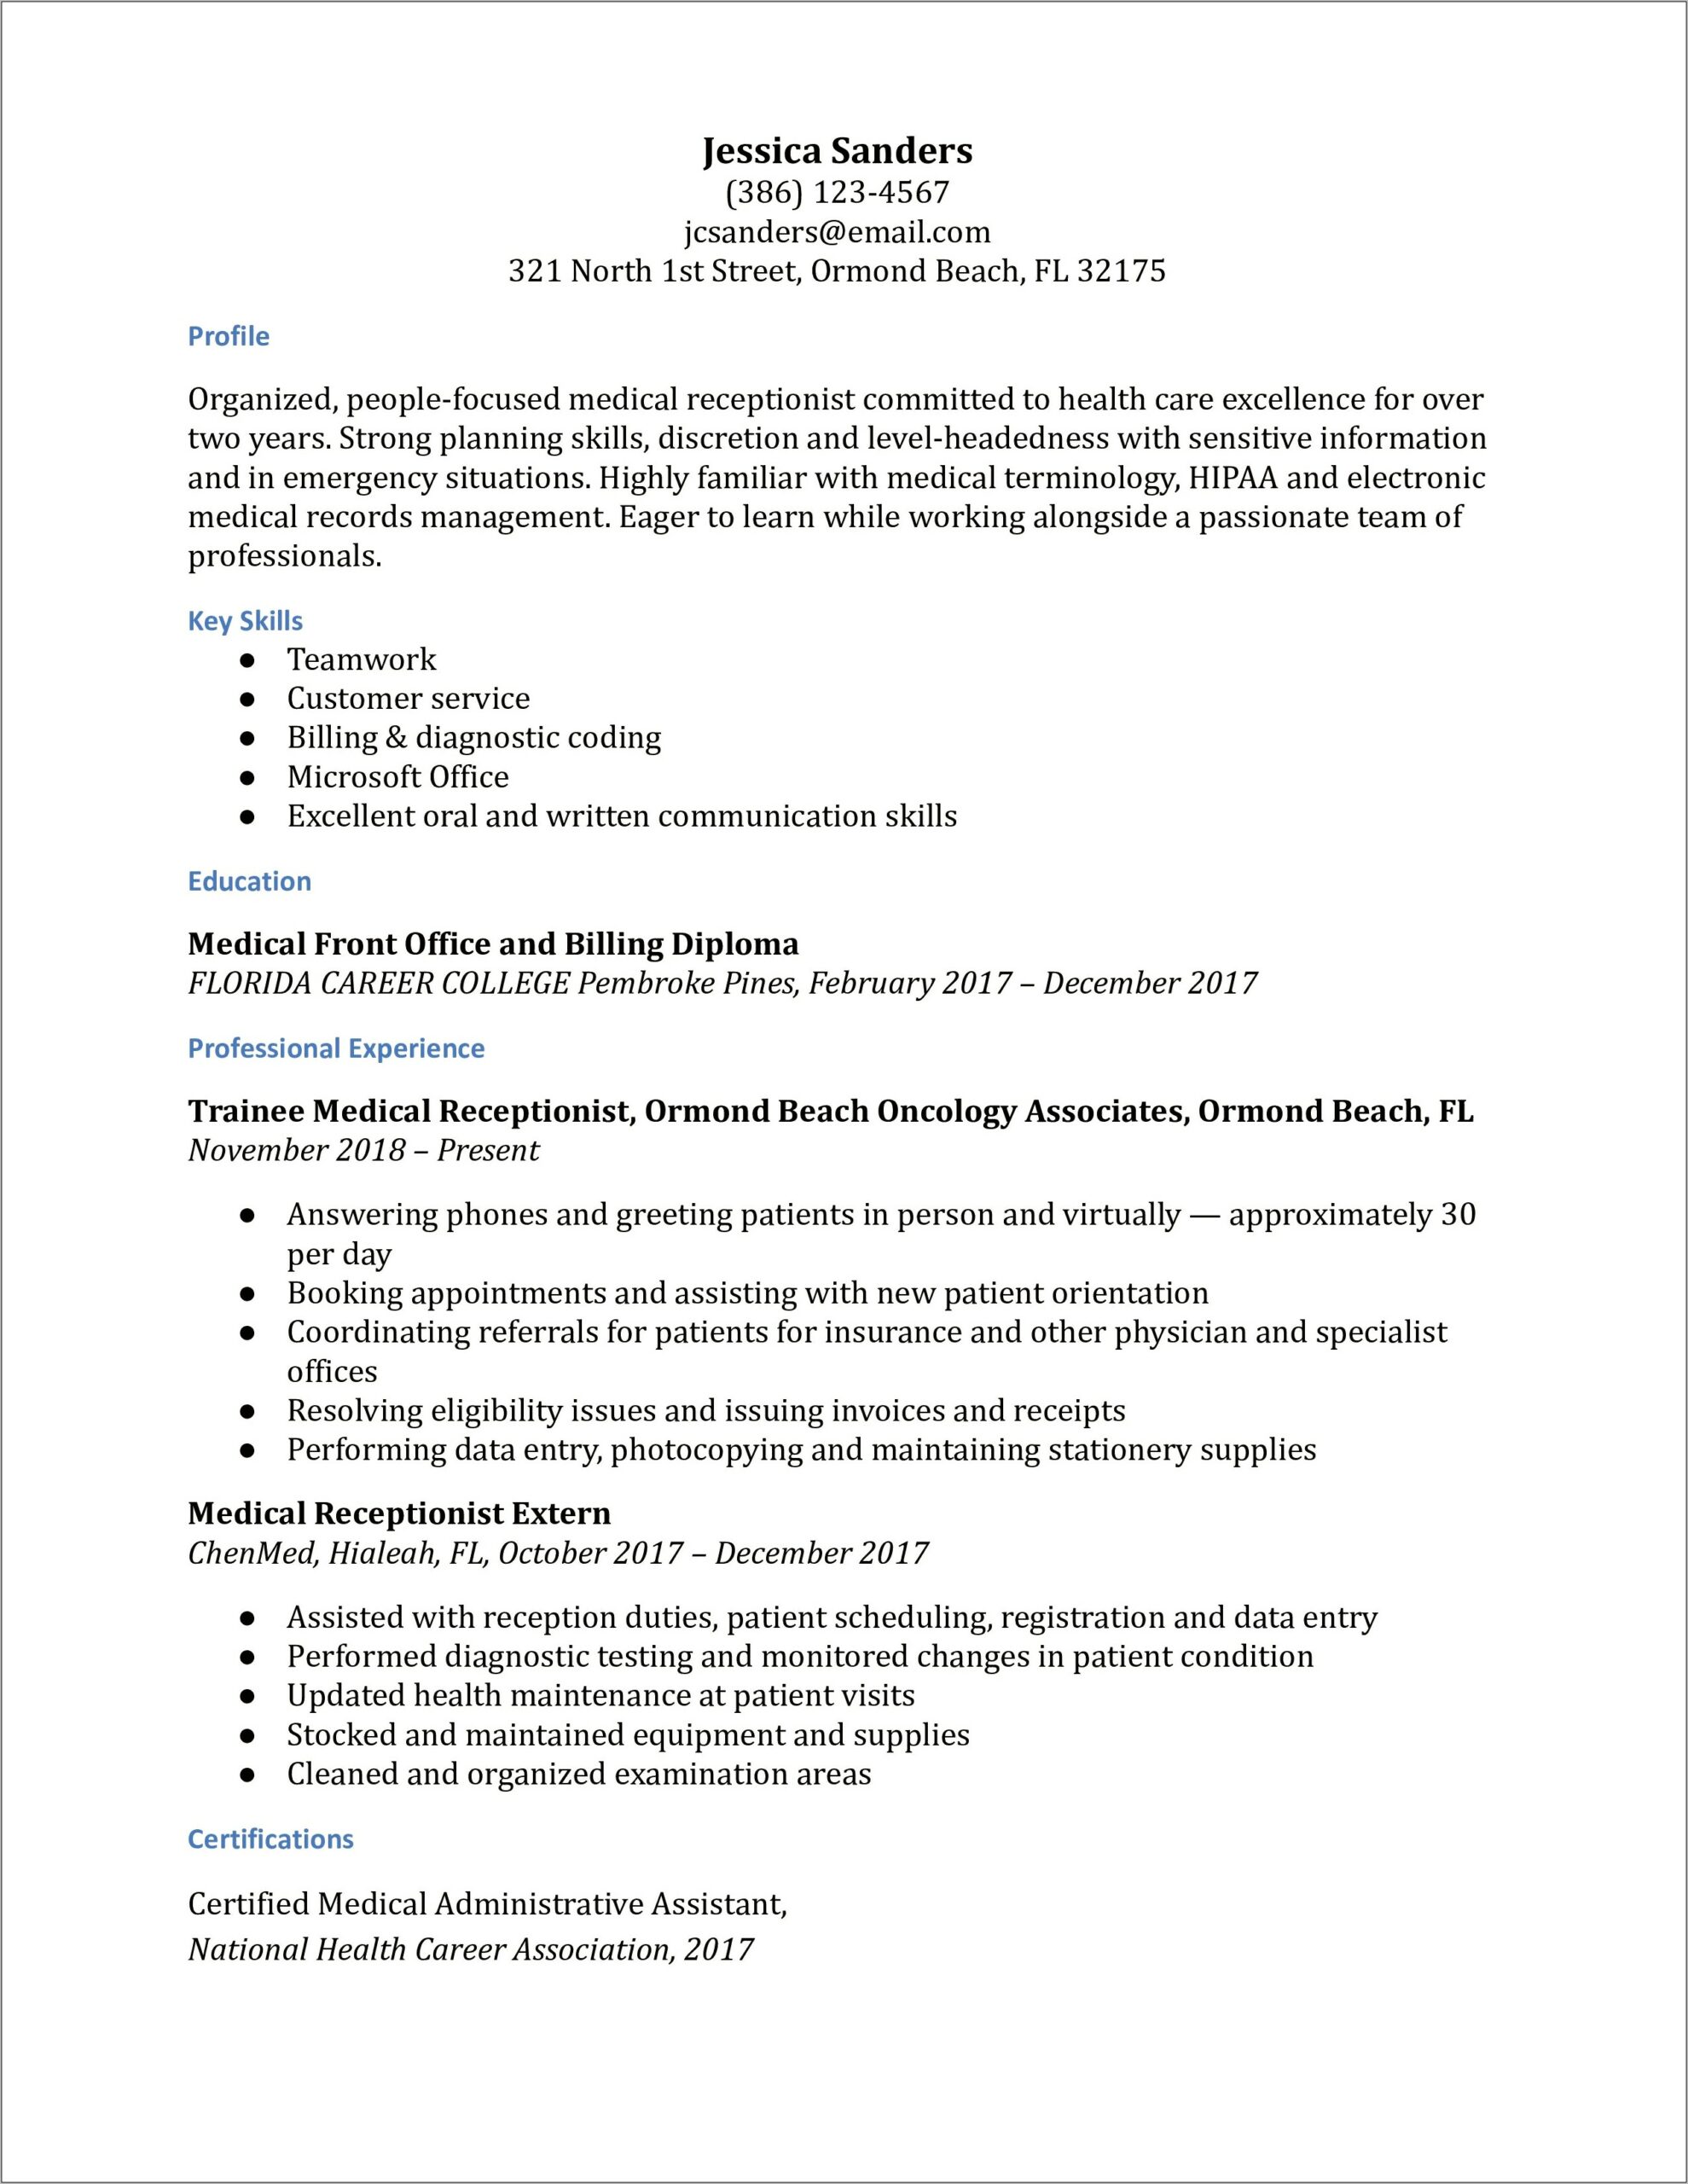 Example Of Resumes For Medical Receptioist